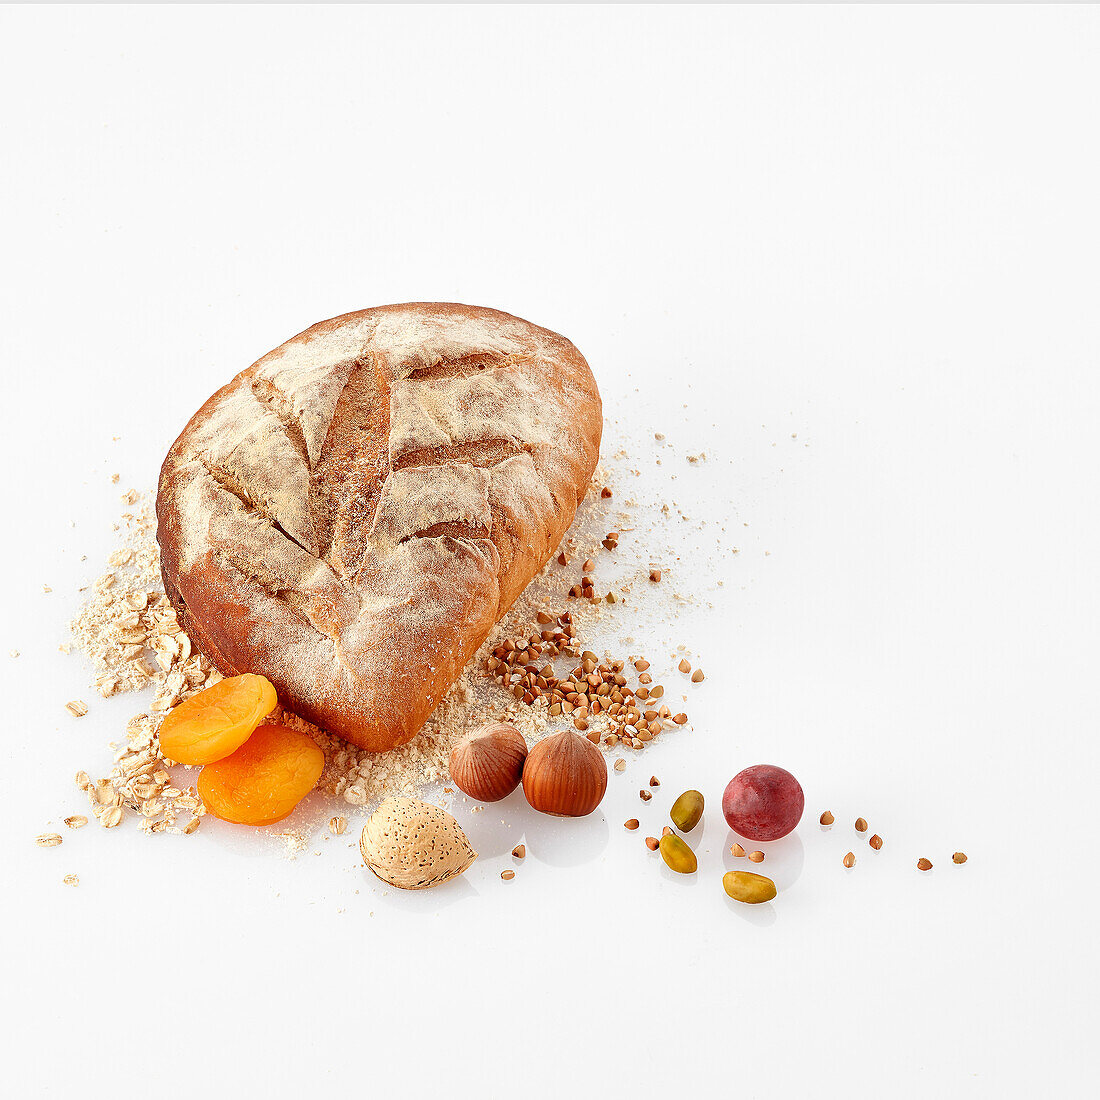 Bread with various ingredients against a white background